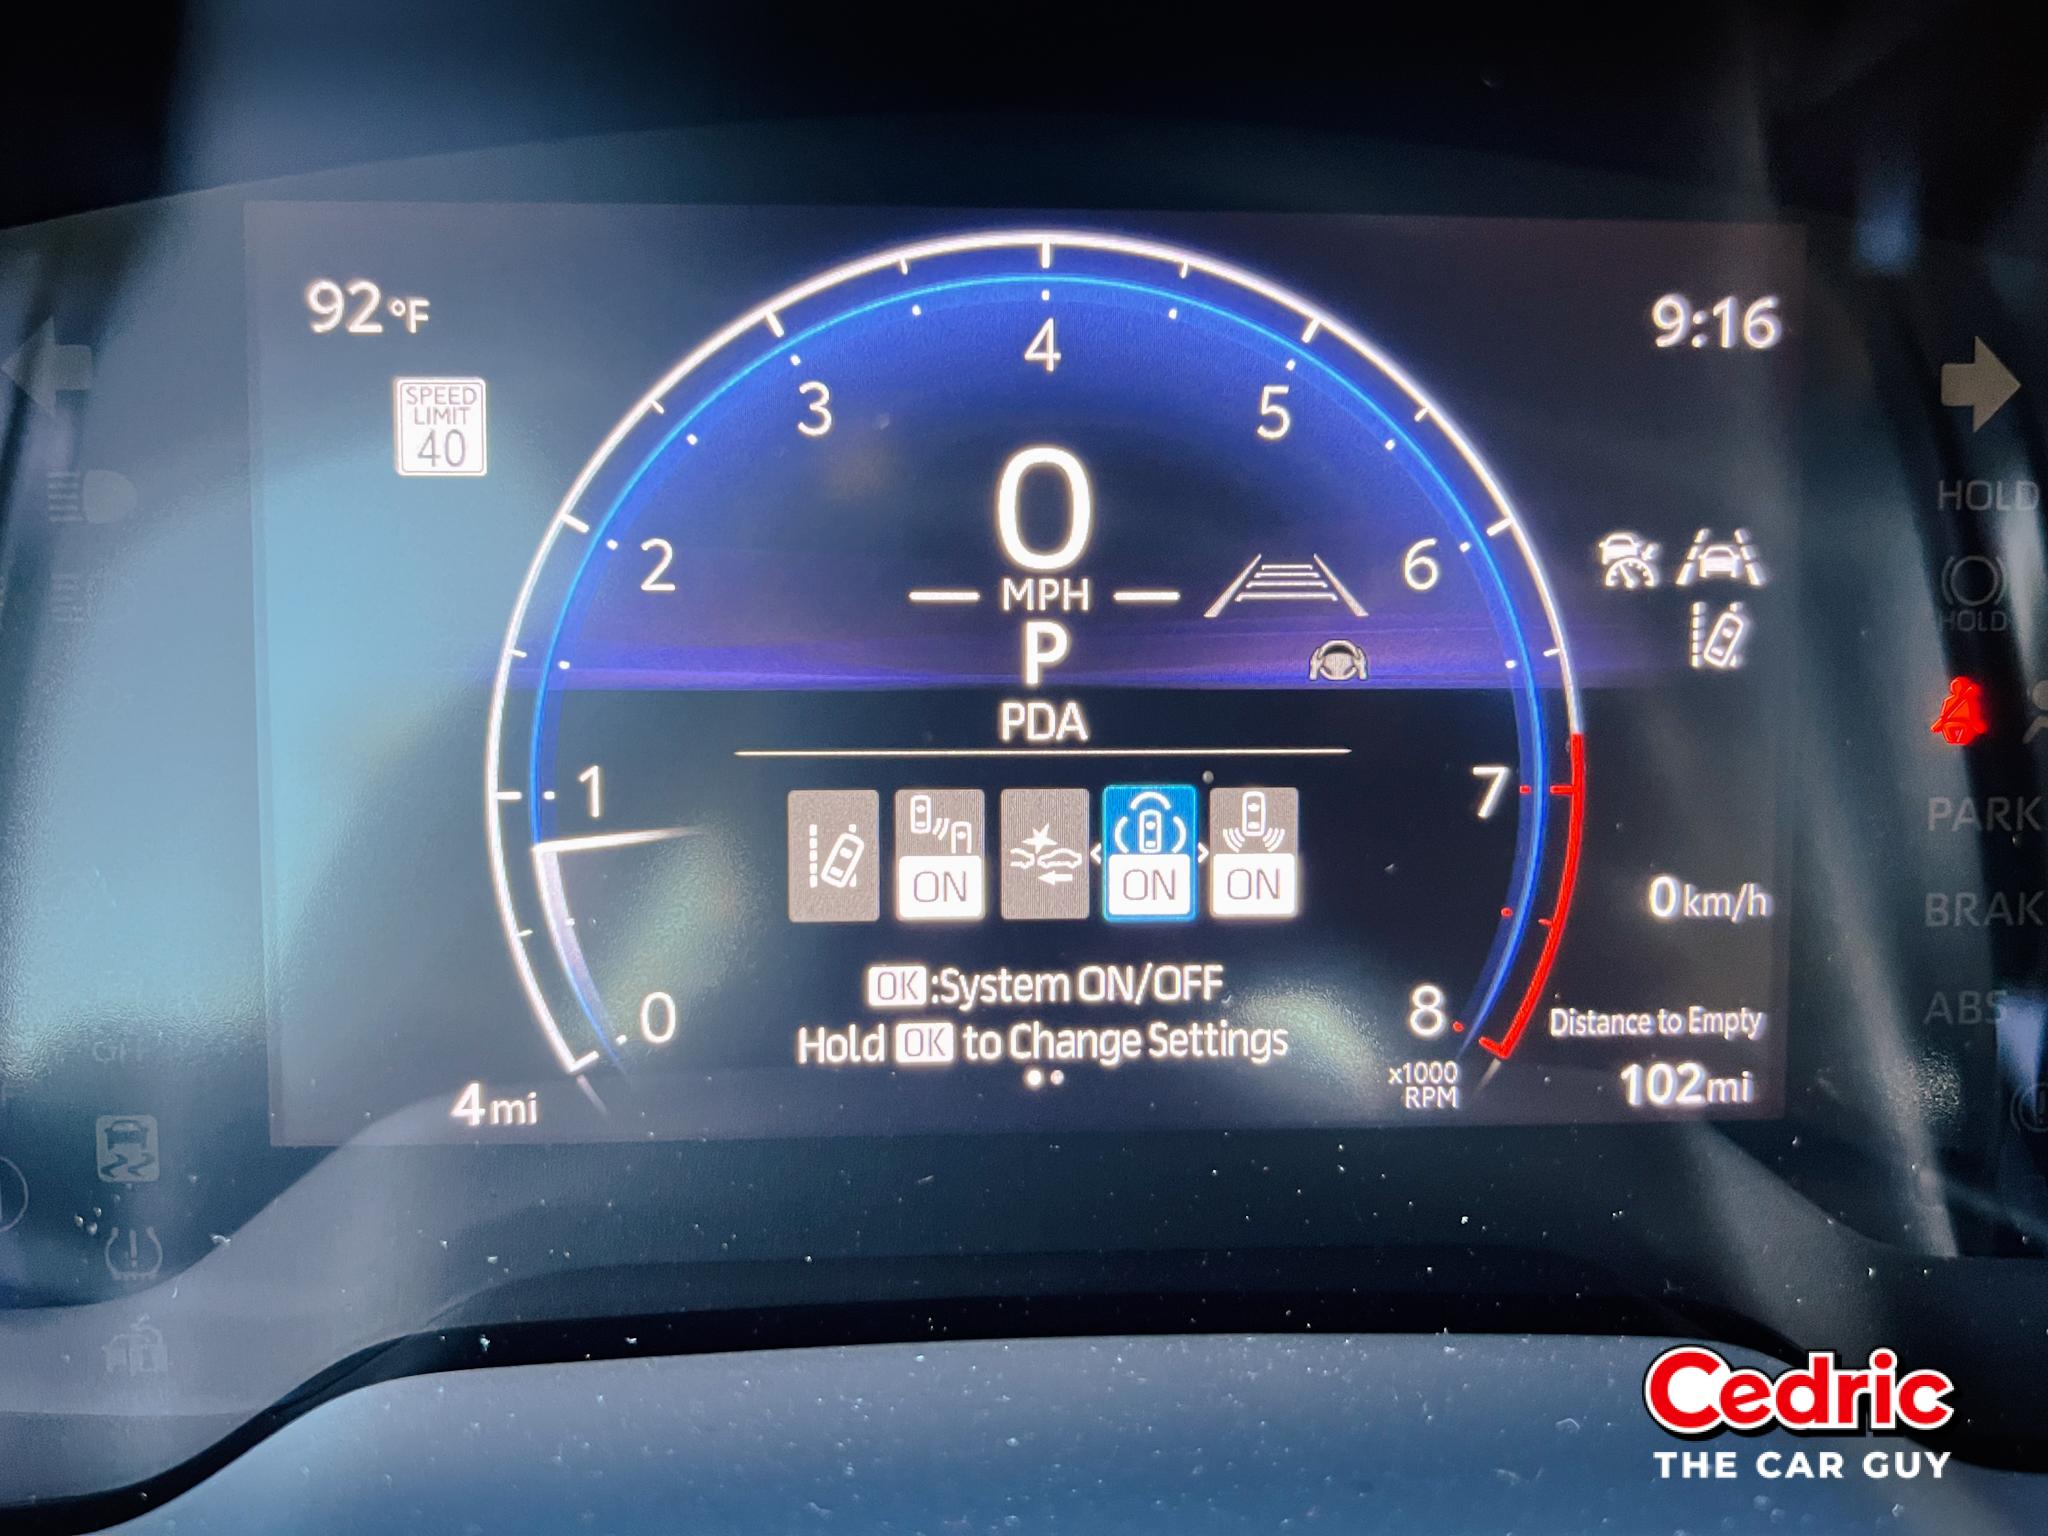 Proactive Driving Assist within the 7-inch Toyota MID shows the PDA's toggle status by highlighting the car inside a blue semi-triangular icon.